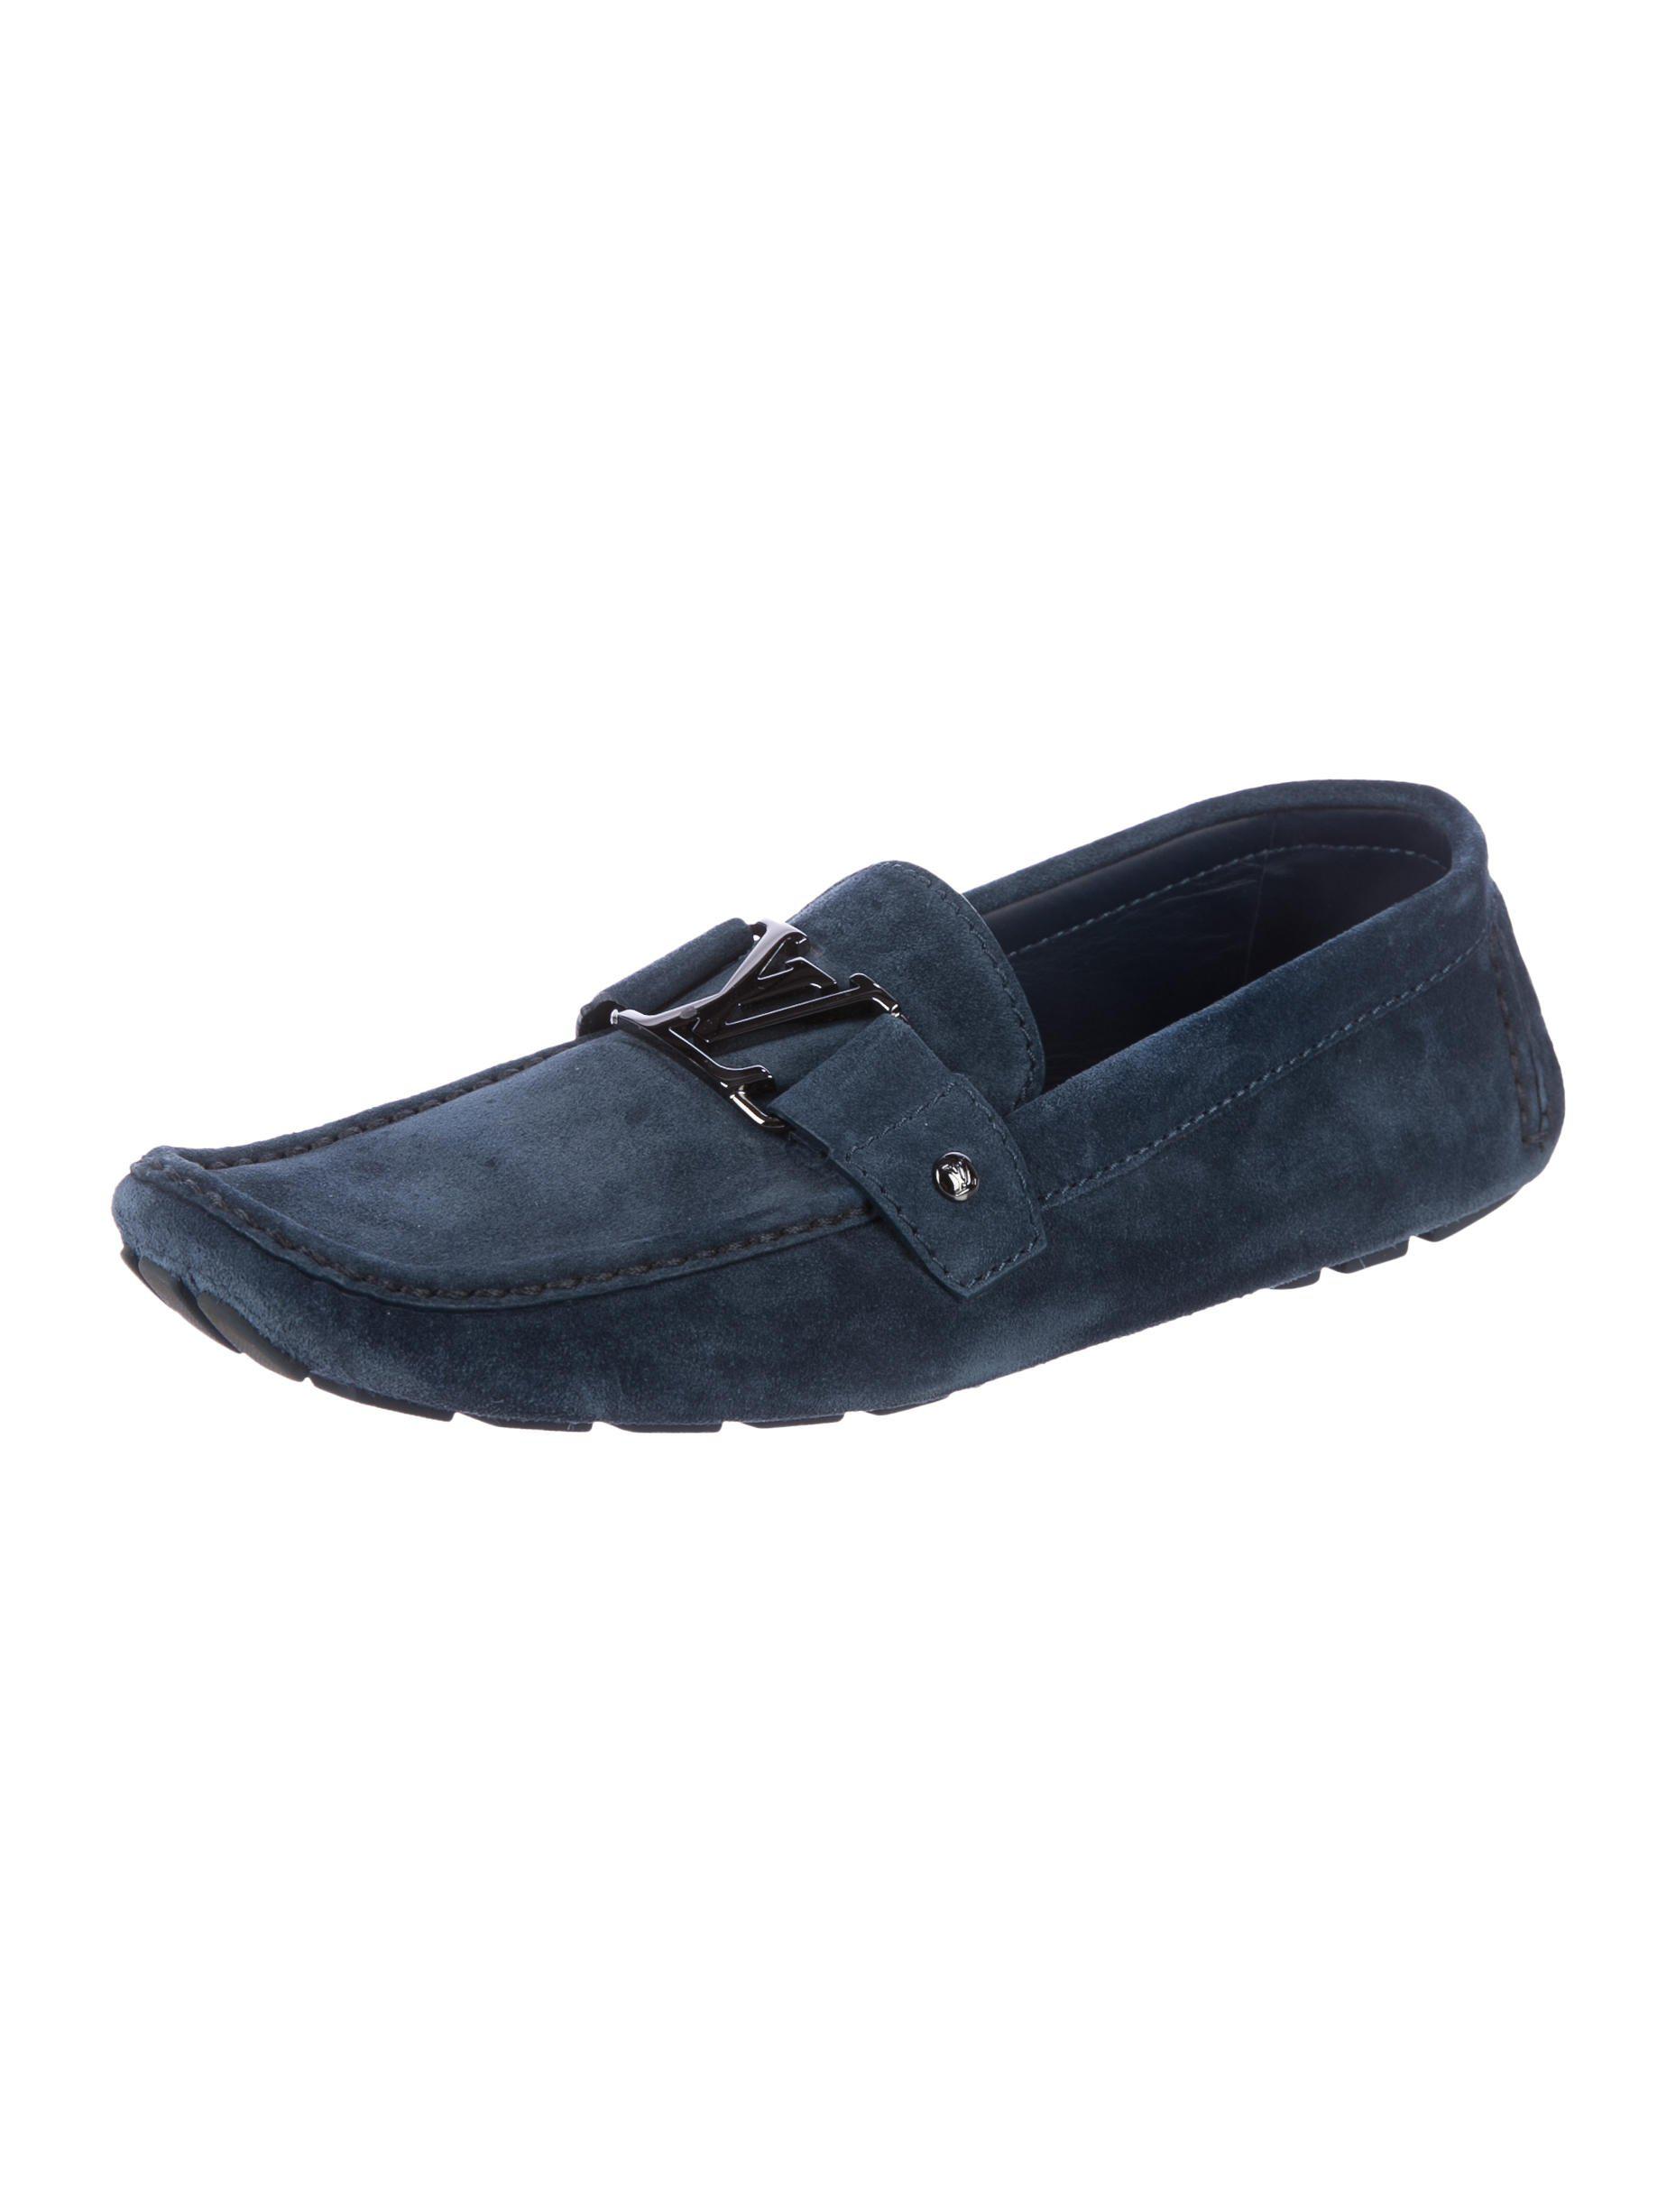 Lyst - Louis Vuitton Monte Carlo Suede Loafers in Blue for Men